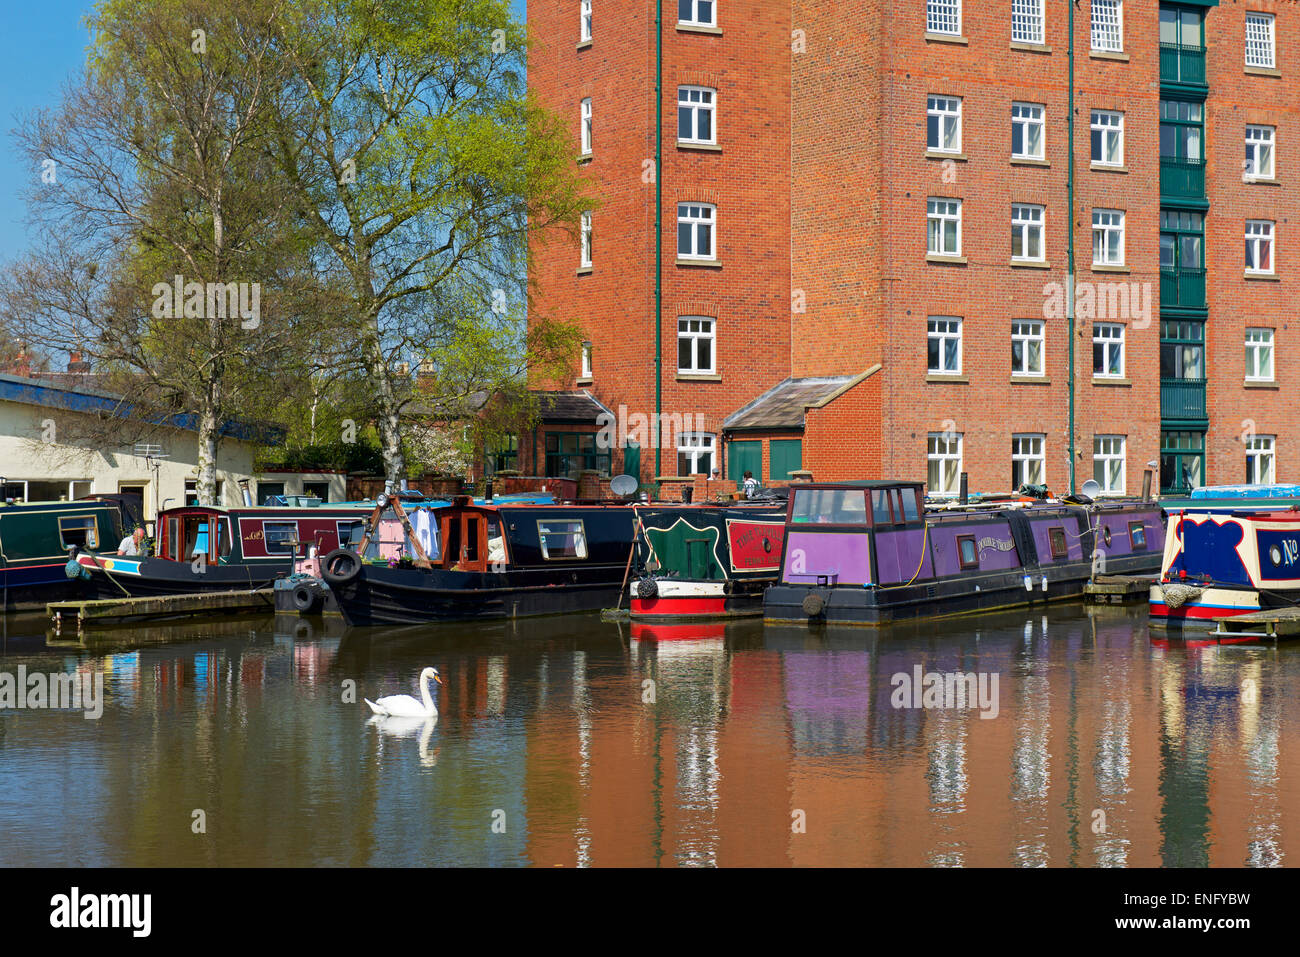 The Macclesfield Canal, in Macclesfield, Cheshire, England UK Stock Photo